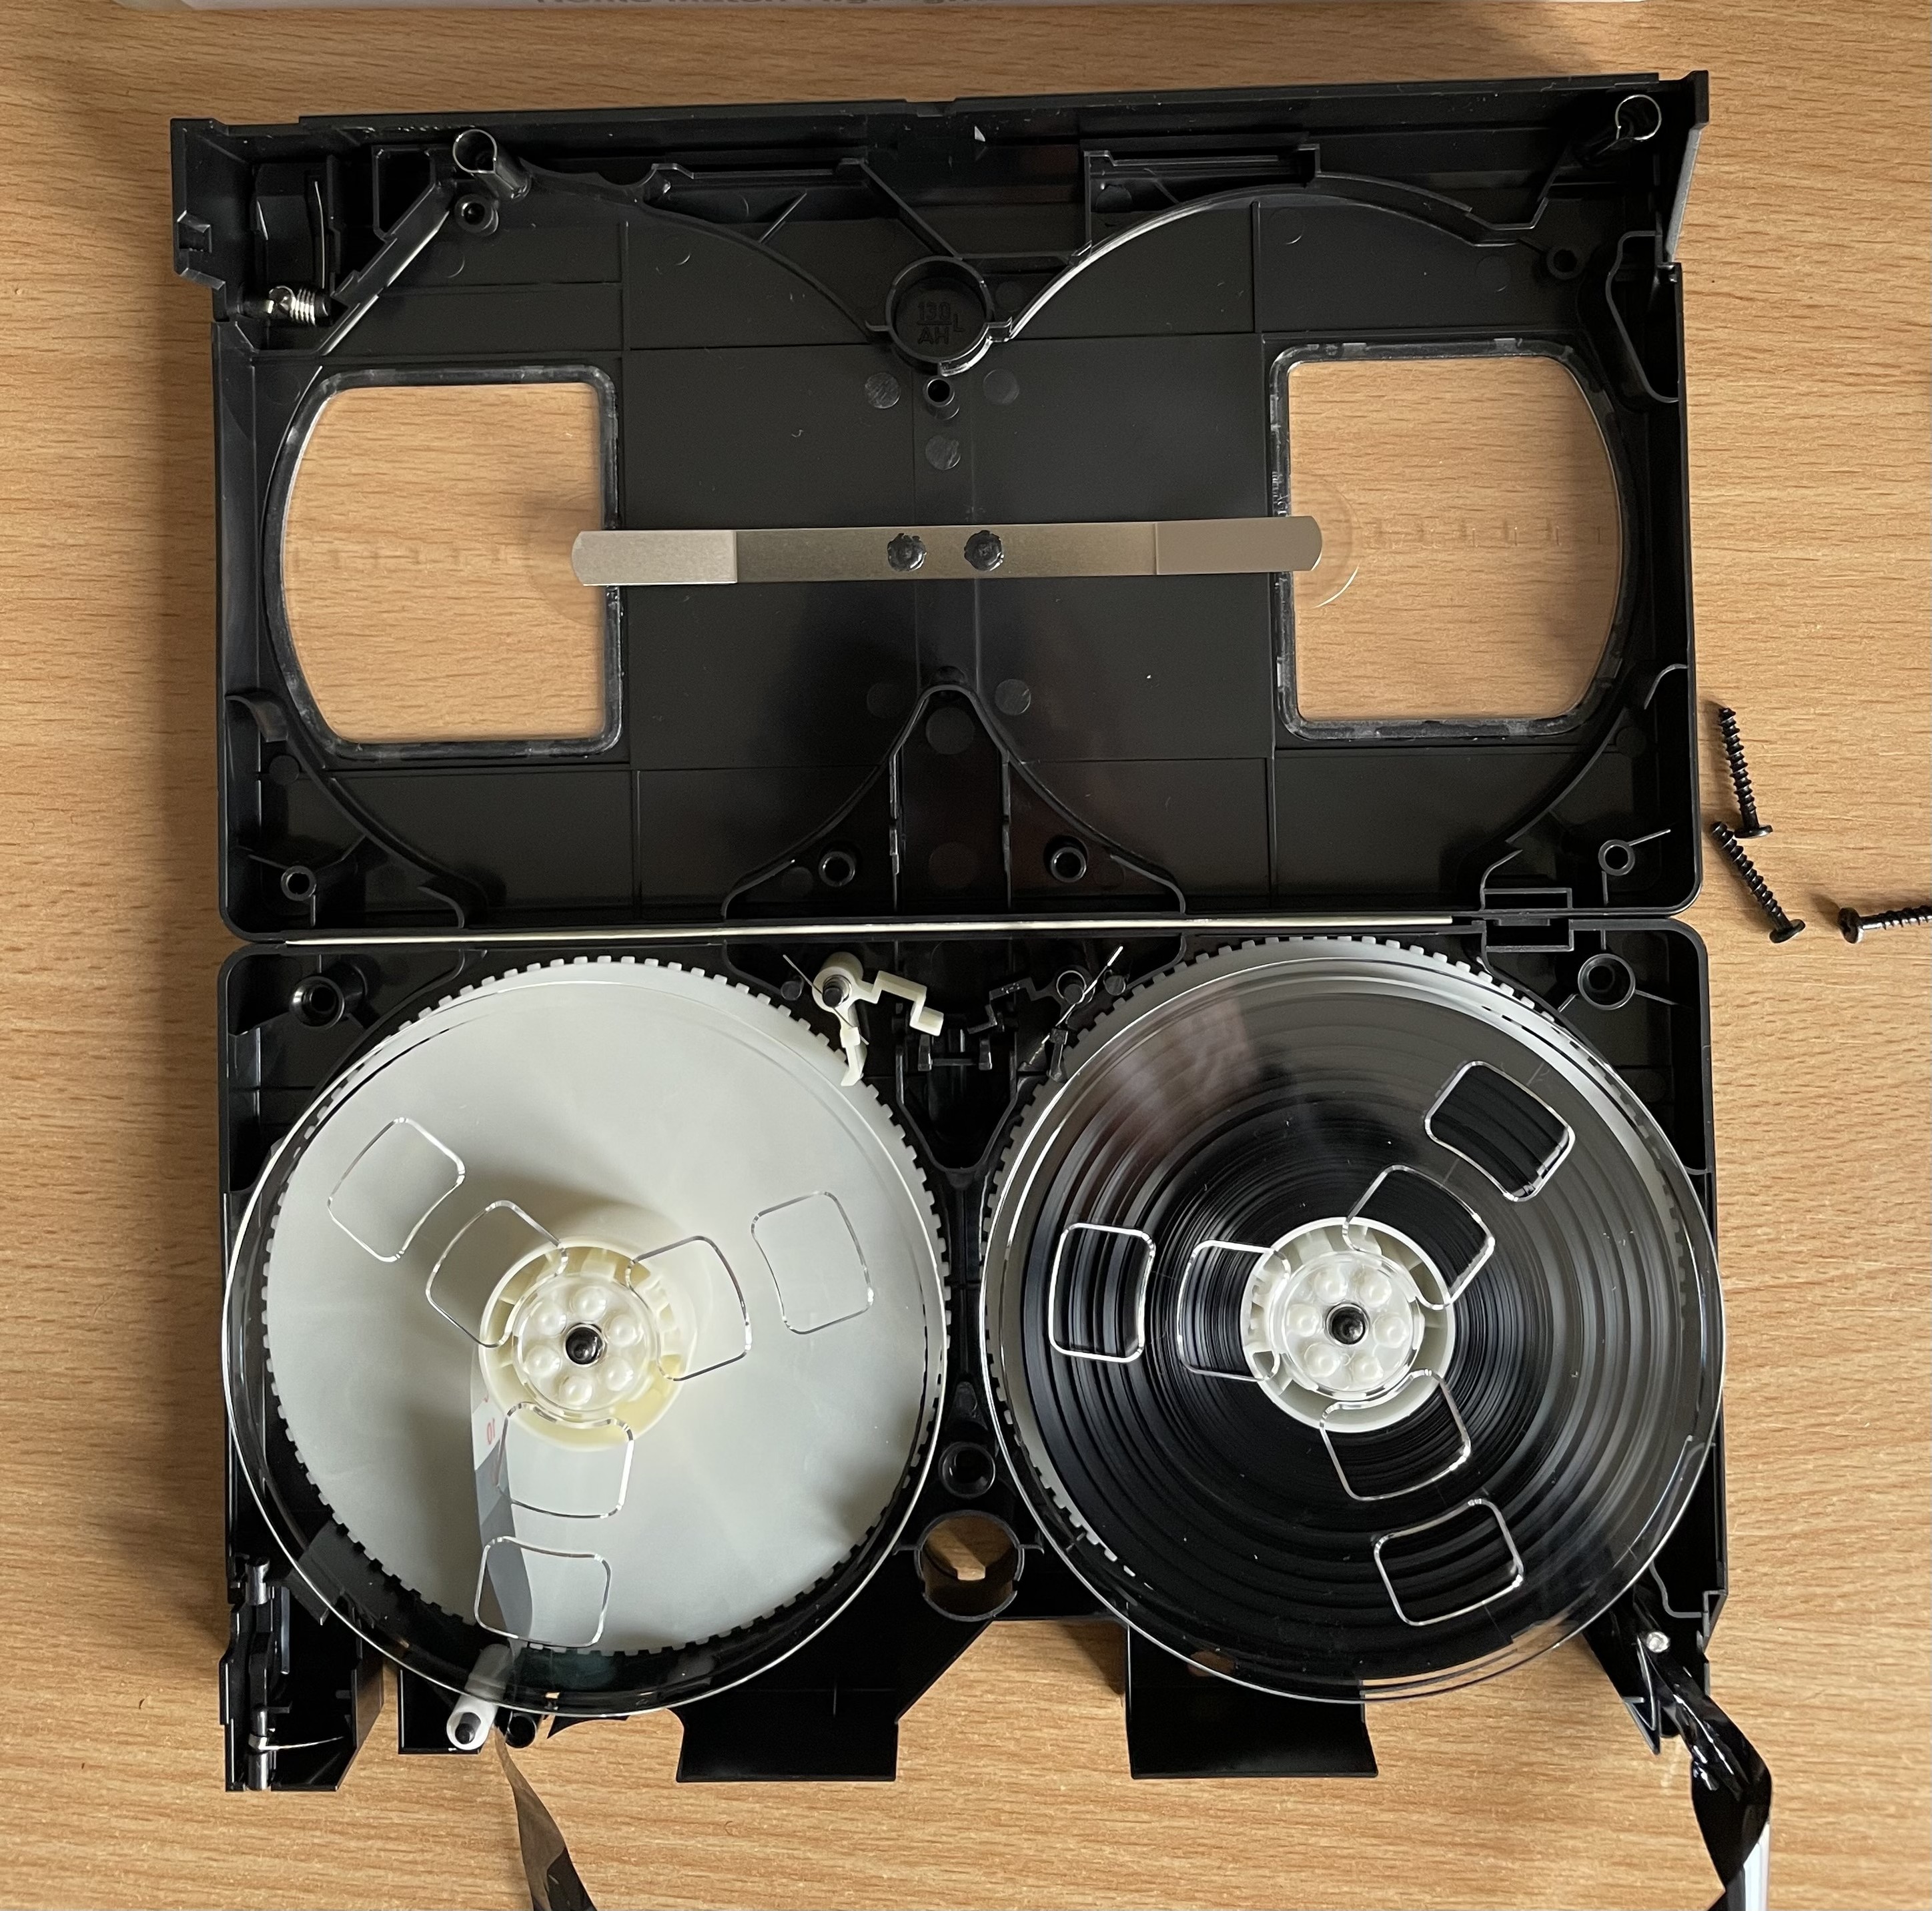 The inside of a VHS tape, showing two reels of tape.